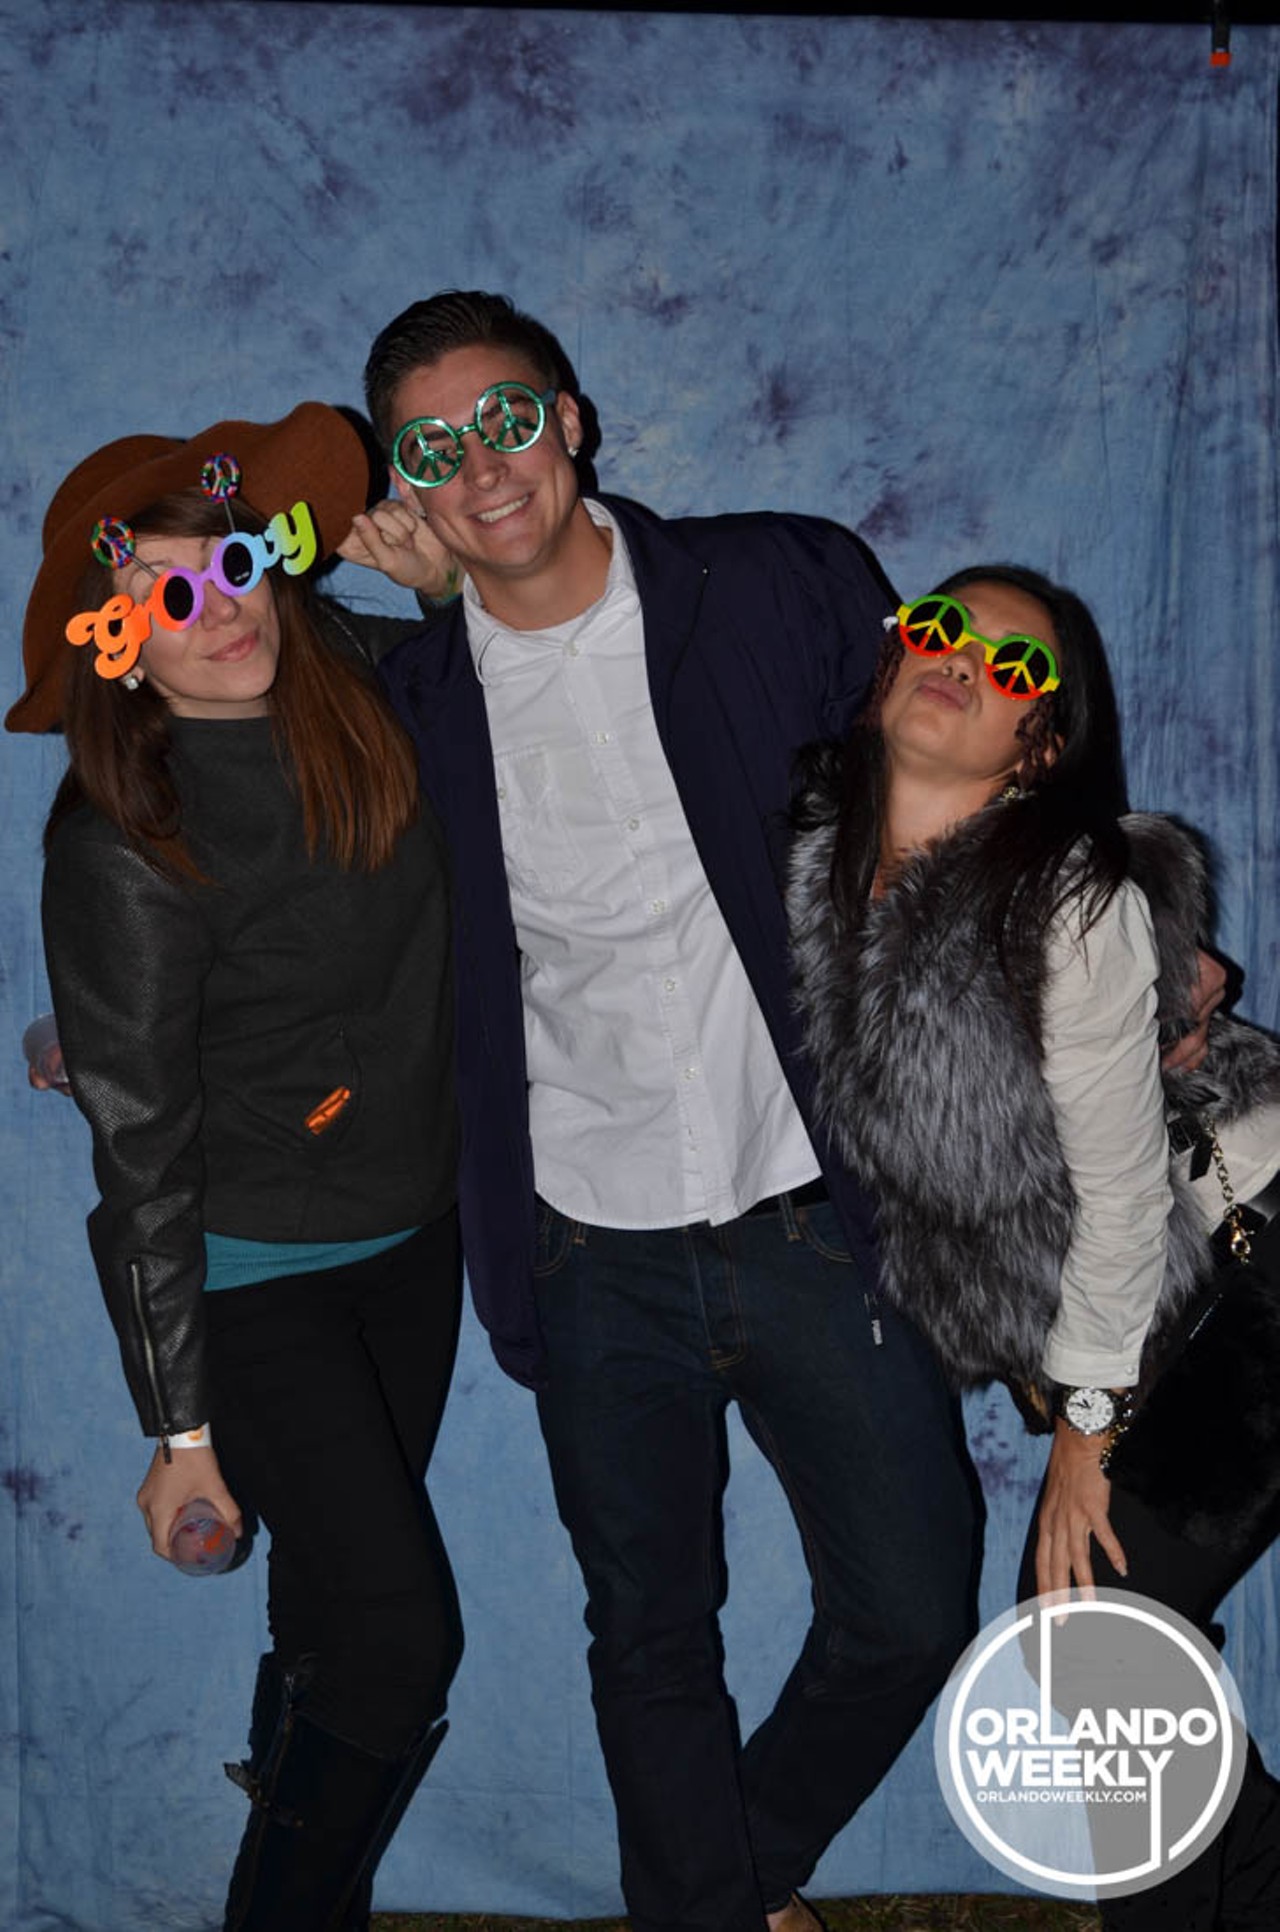 PROMO: Groovy photos from the Red Lenz Photography booth at Drink Around The Hood